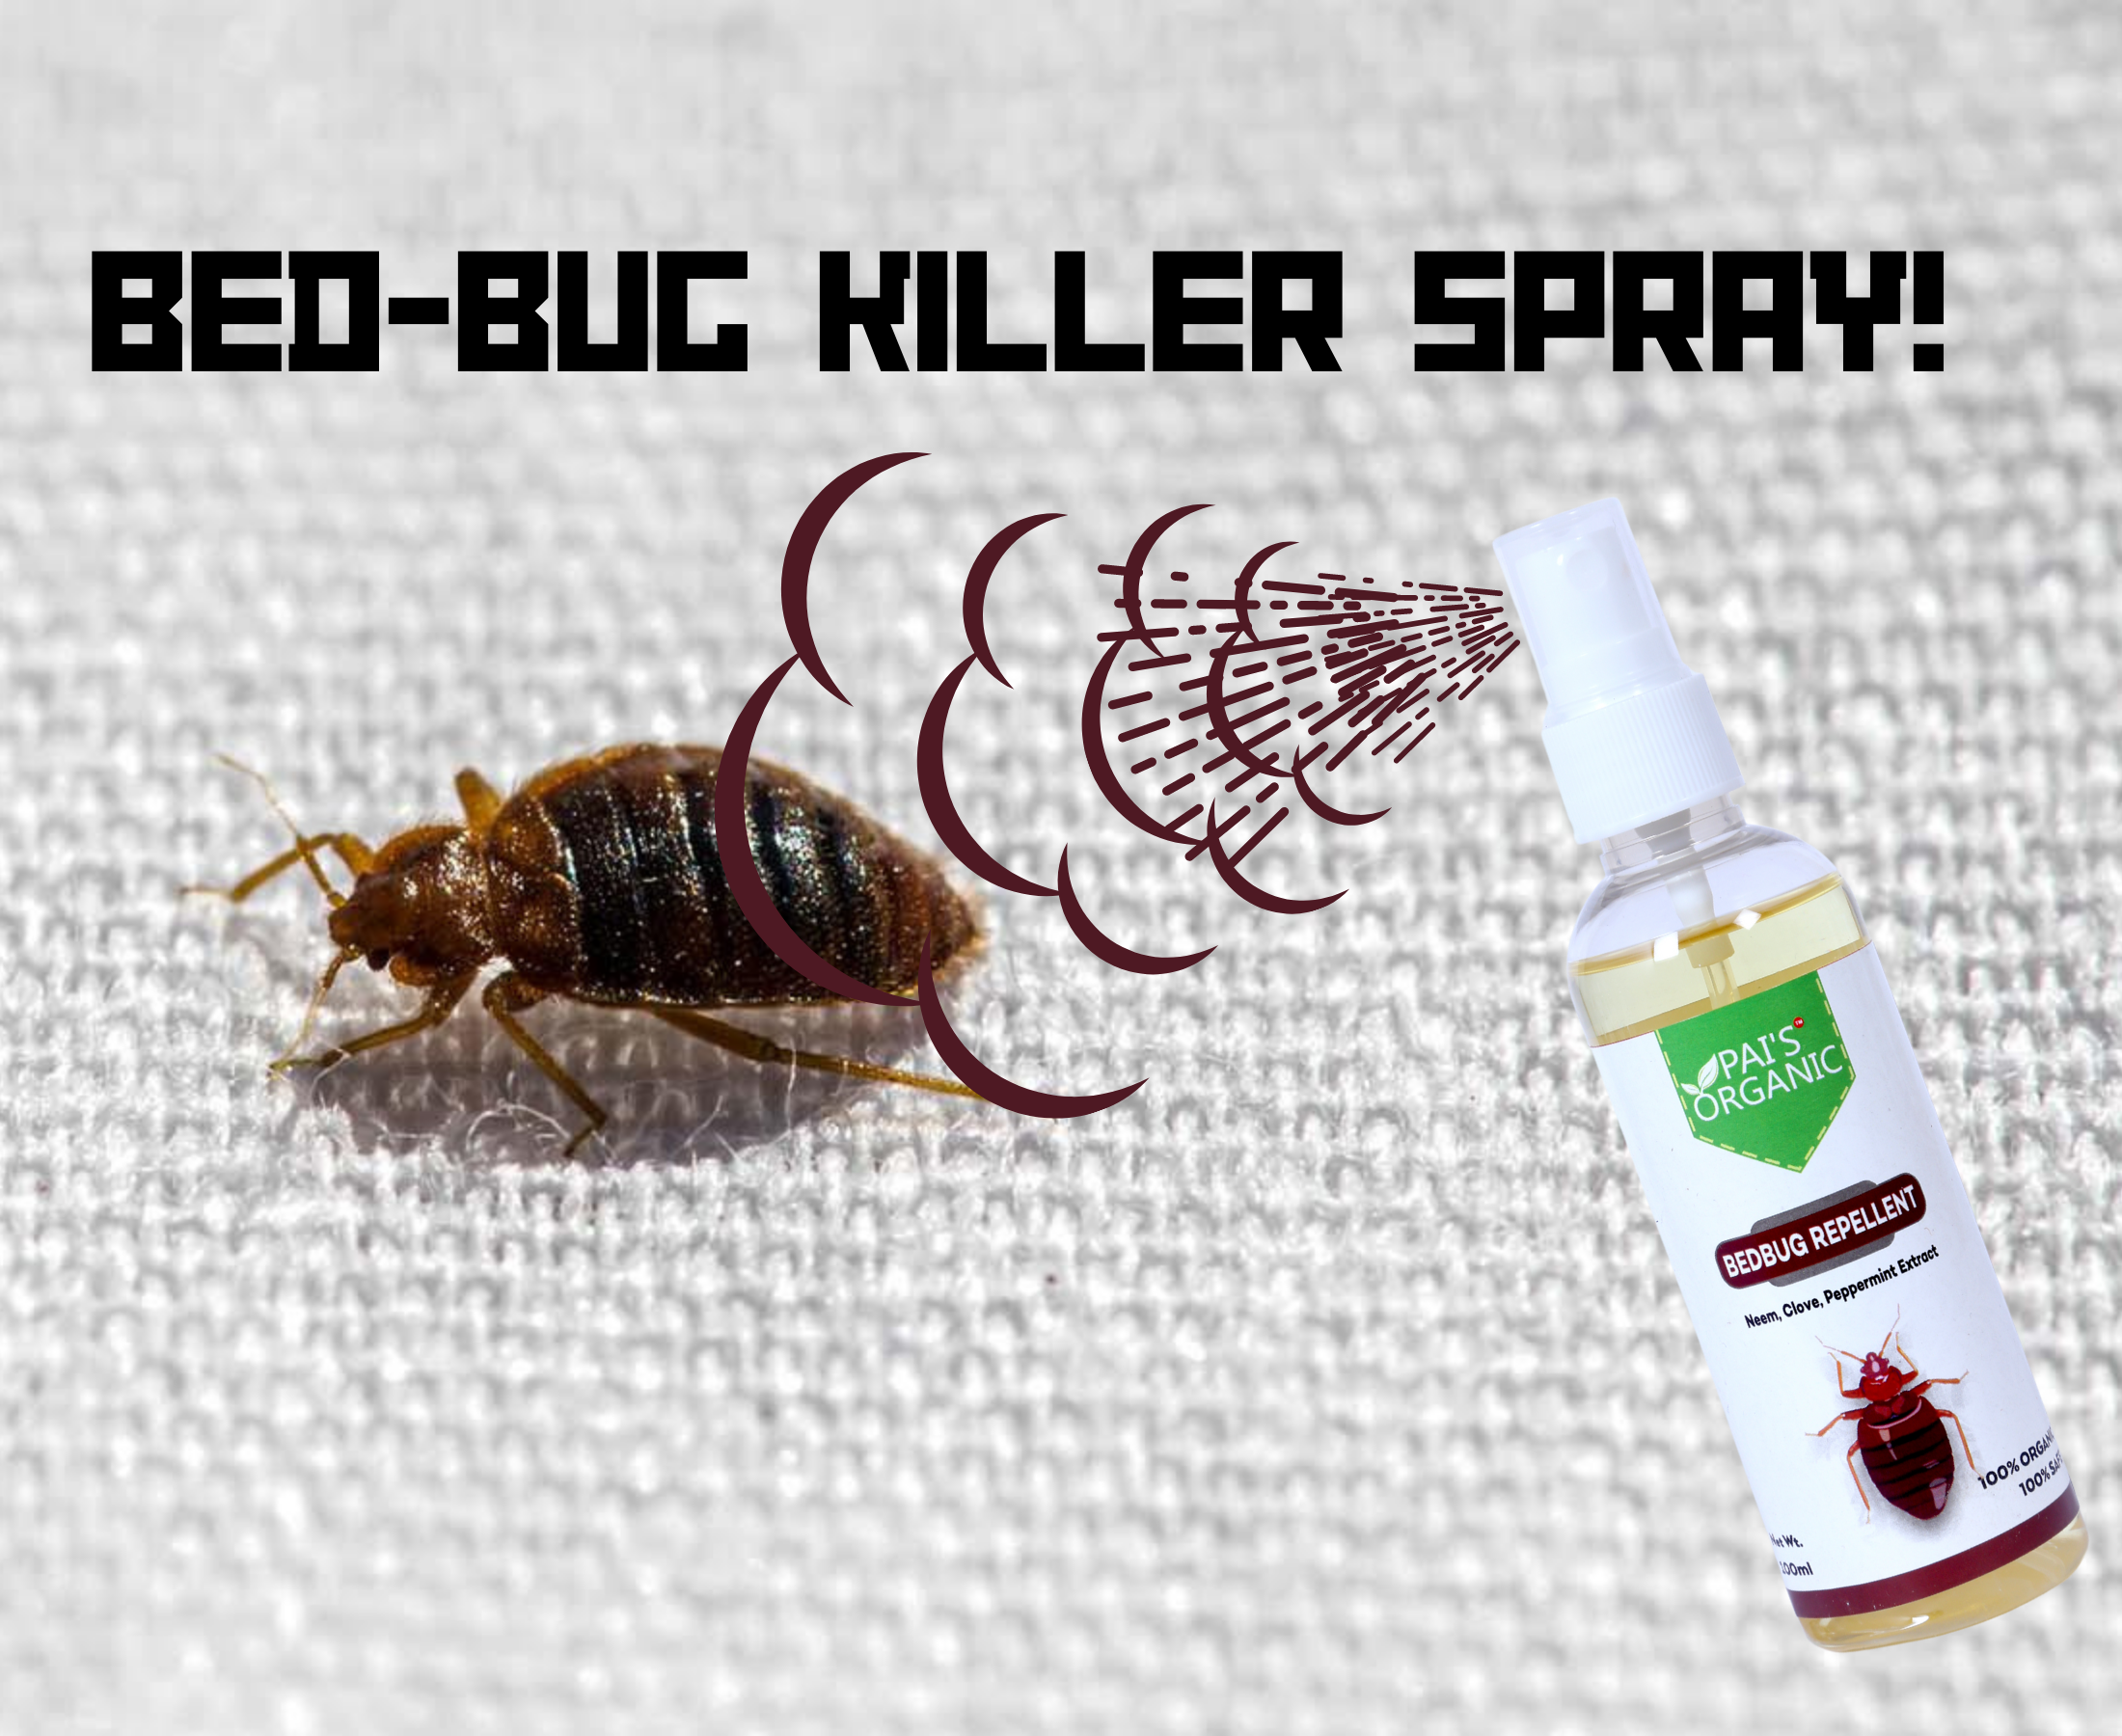 What are the best sprays to control bed bugs?